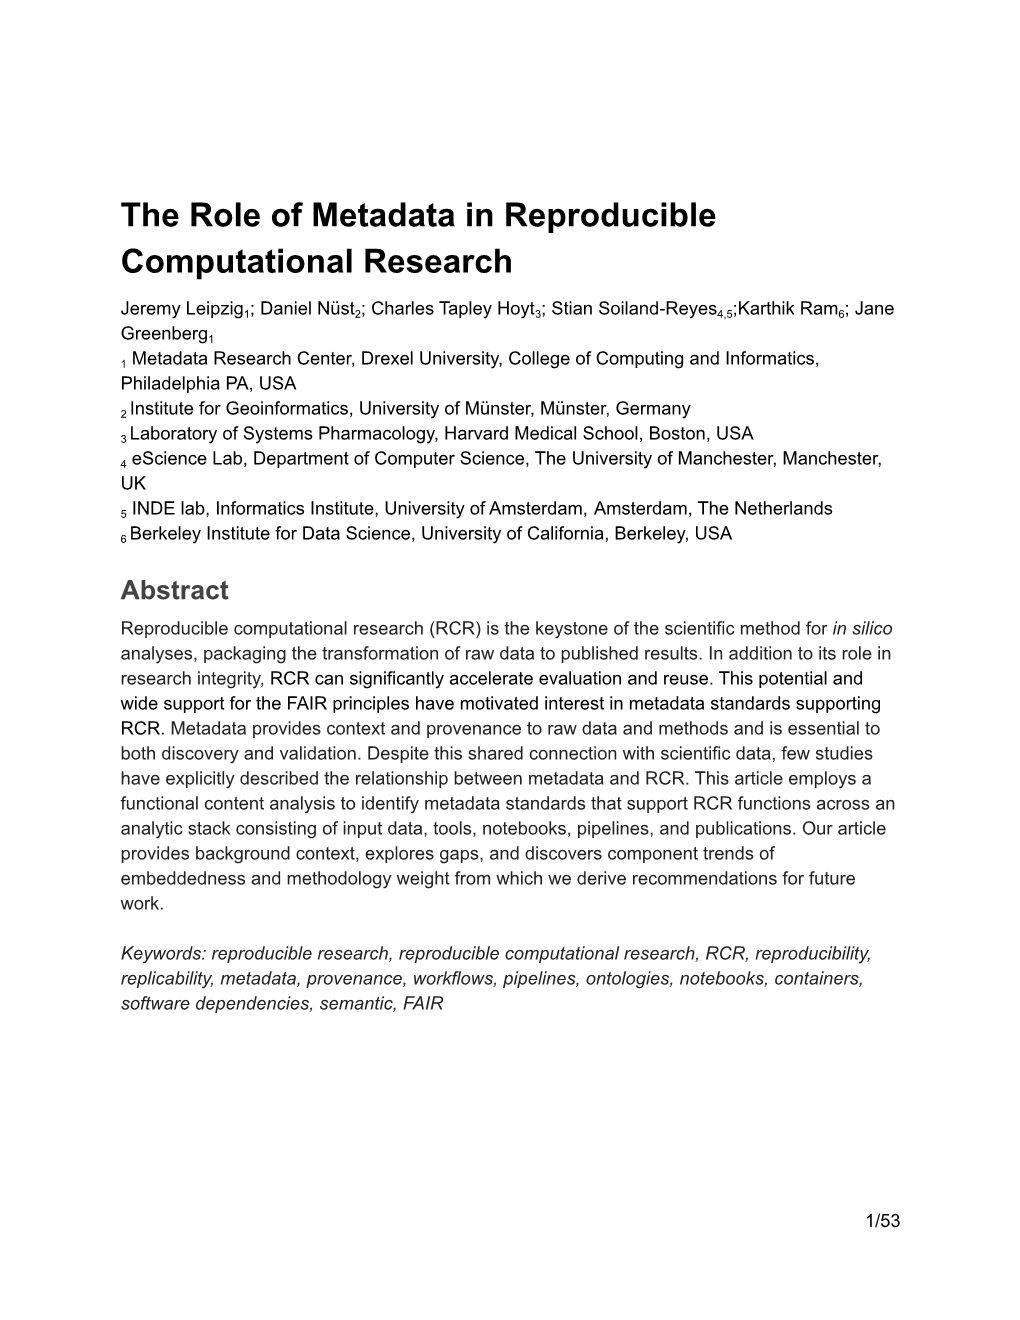 The Role of Metadata in Reproducible Computational Research